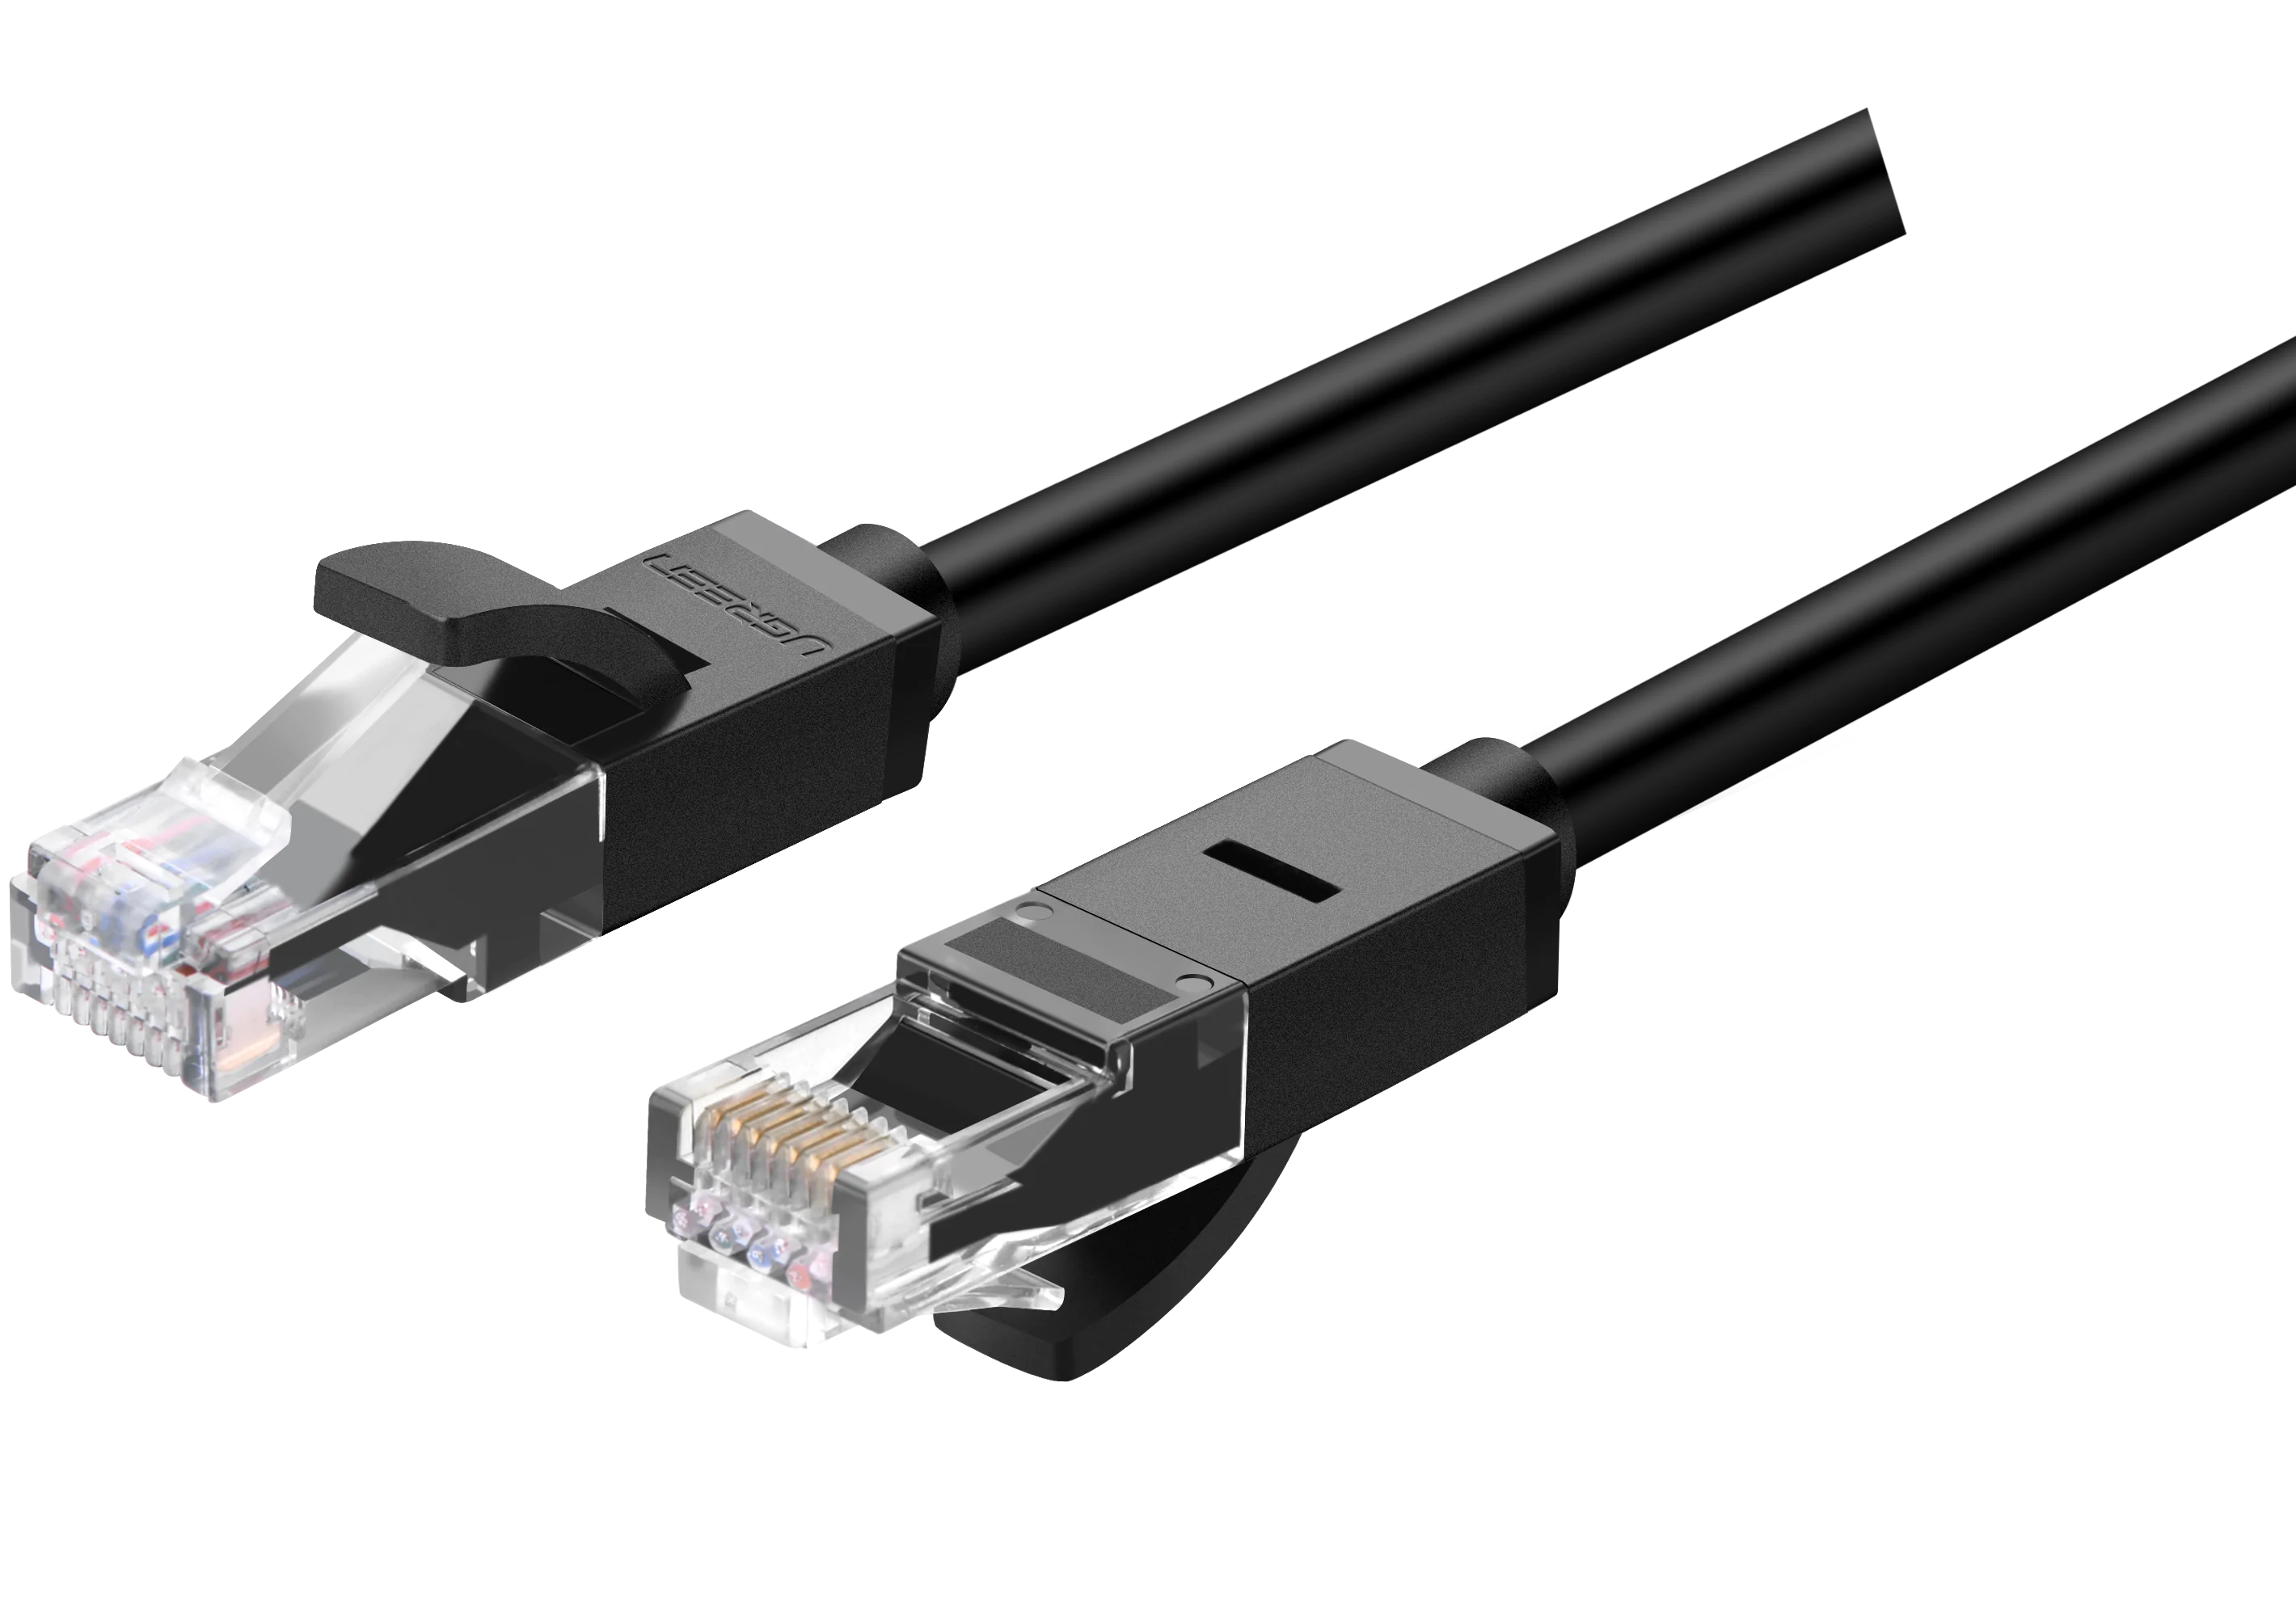 Ugreen Cable Ethernet Flat CAT6 5M